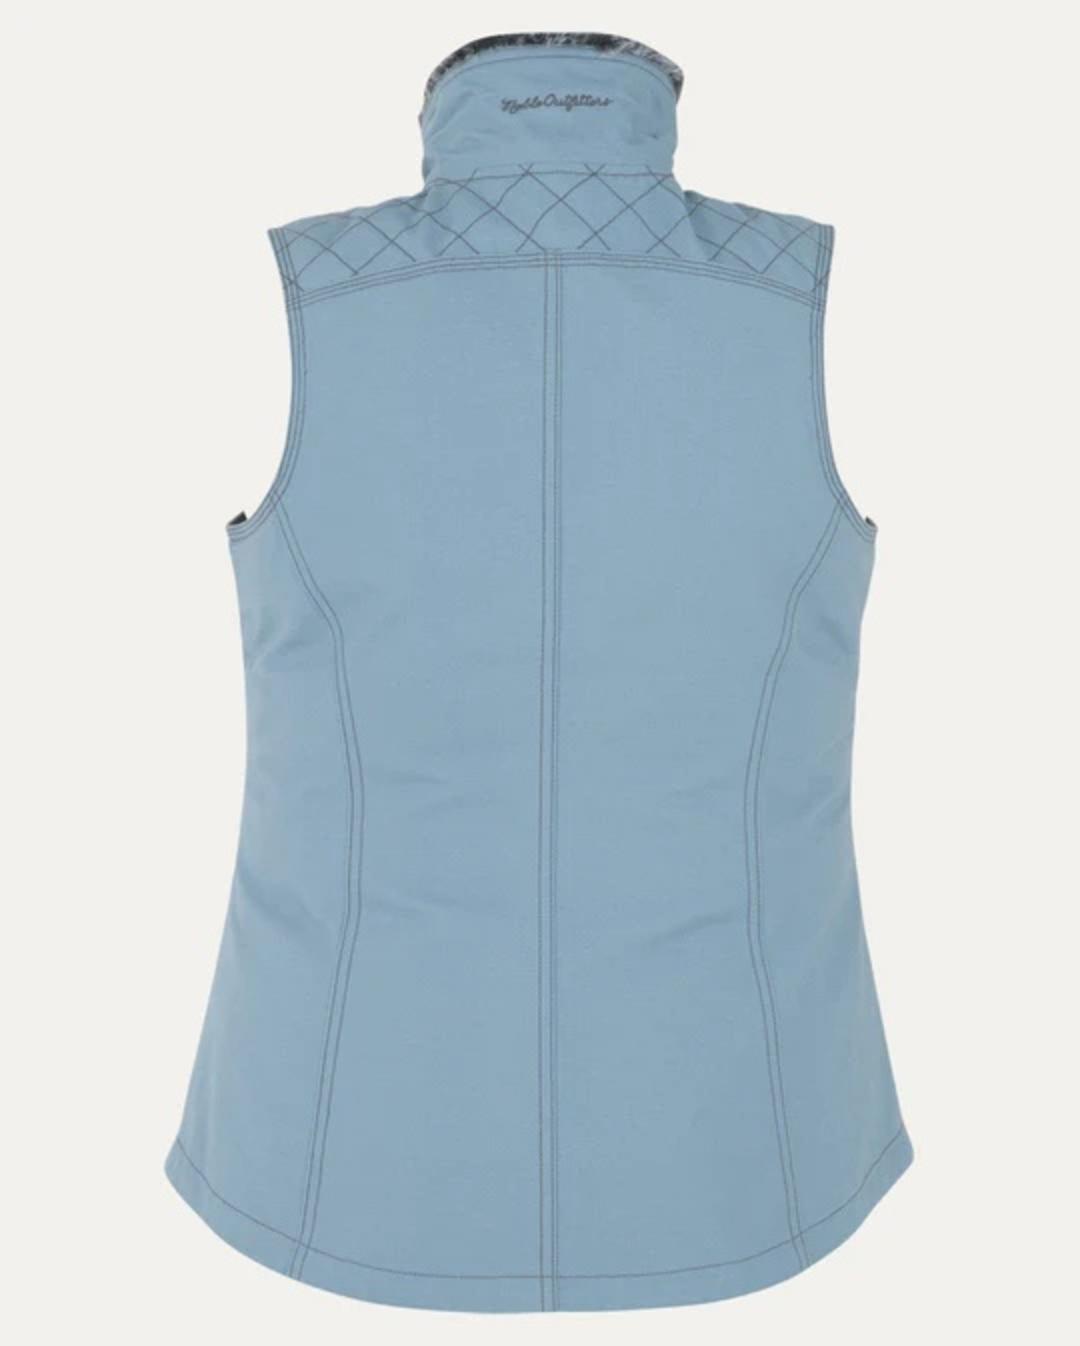 Noble Outfitters Women's Canvas Vest dusty blue Back View